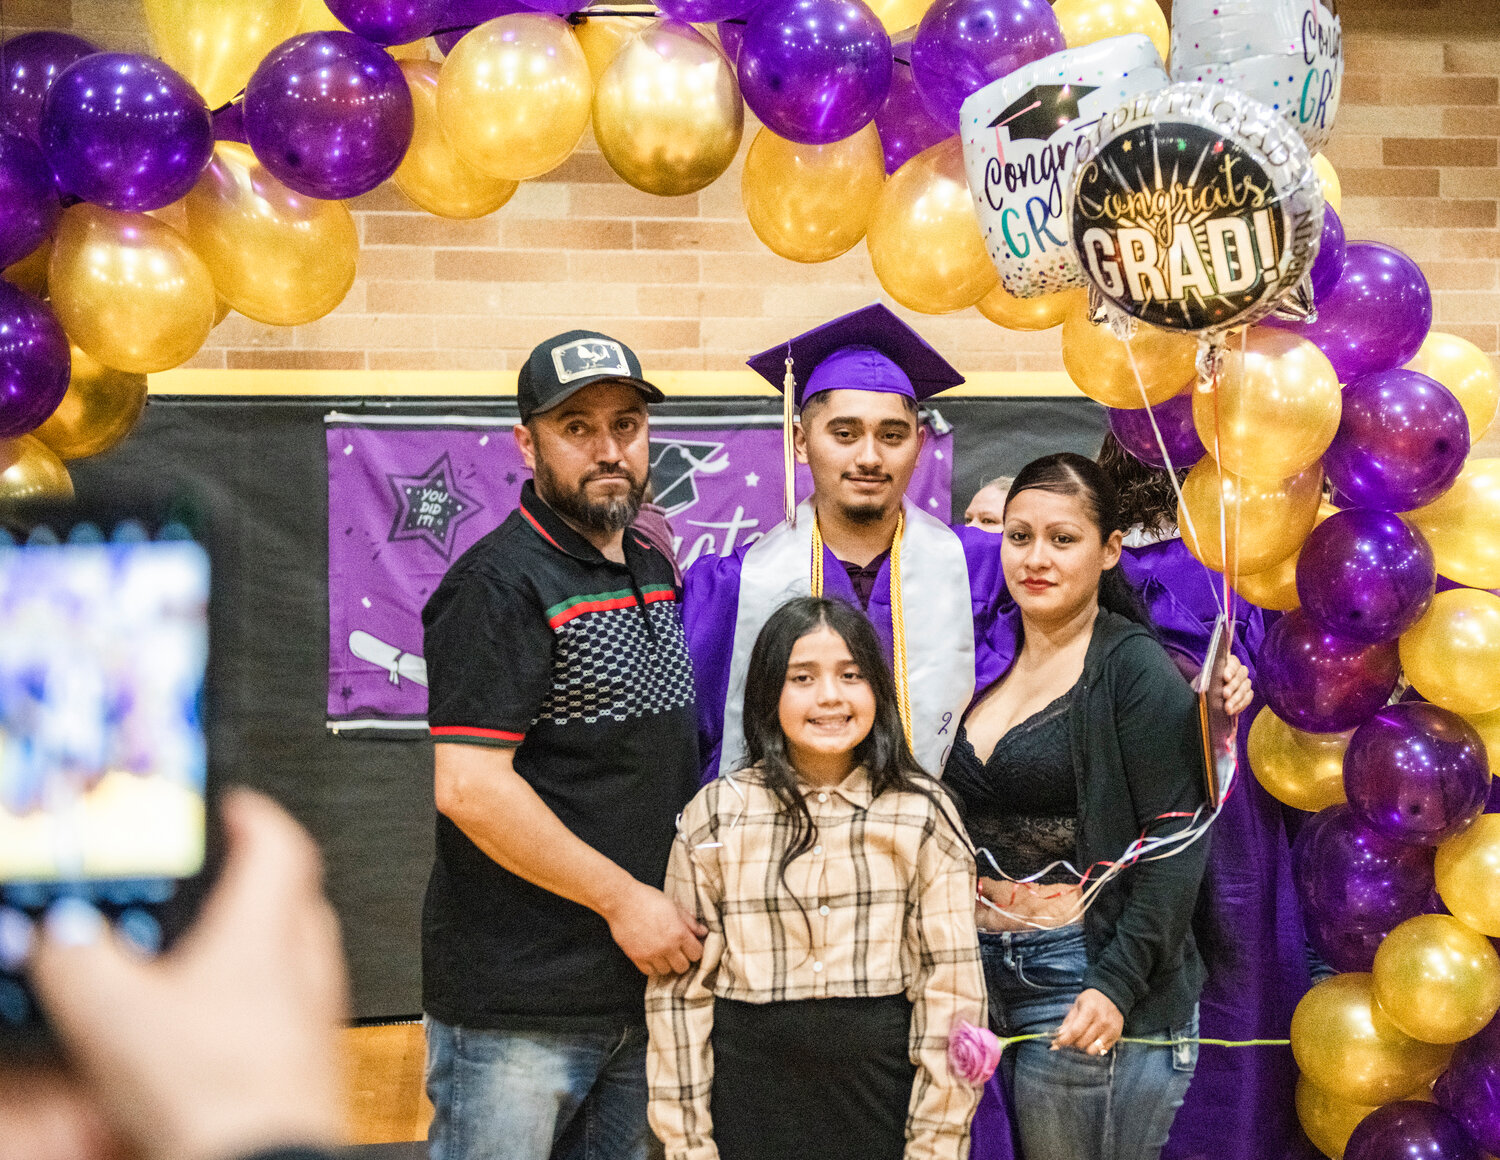 Juan Carlos Cerseda smiles for a photo in the Onalaska High School gym on Friday with his family after graduating with high honors, meaning he had a cumulative GPA between 3.5 and 3.99 for his time at Onalaska High School.